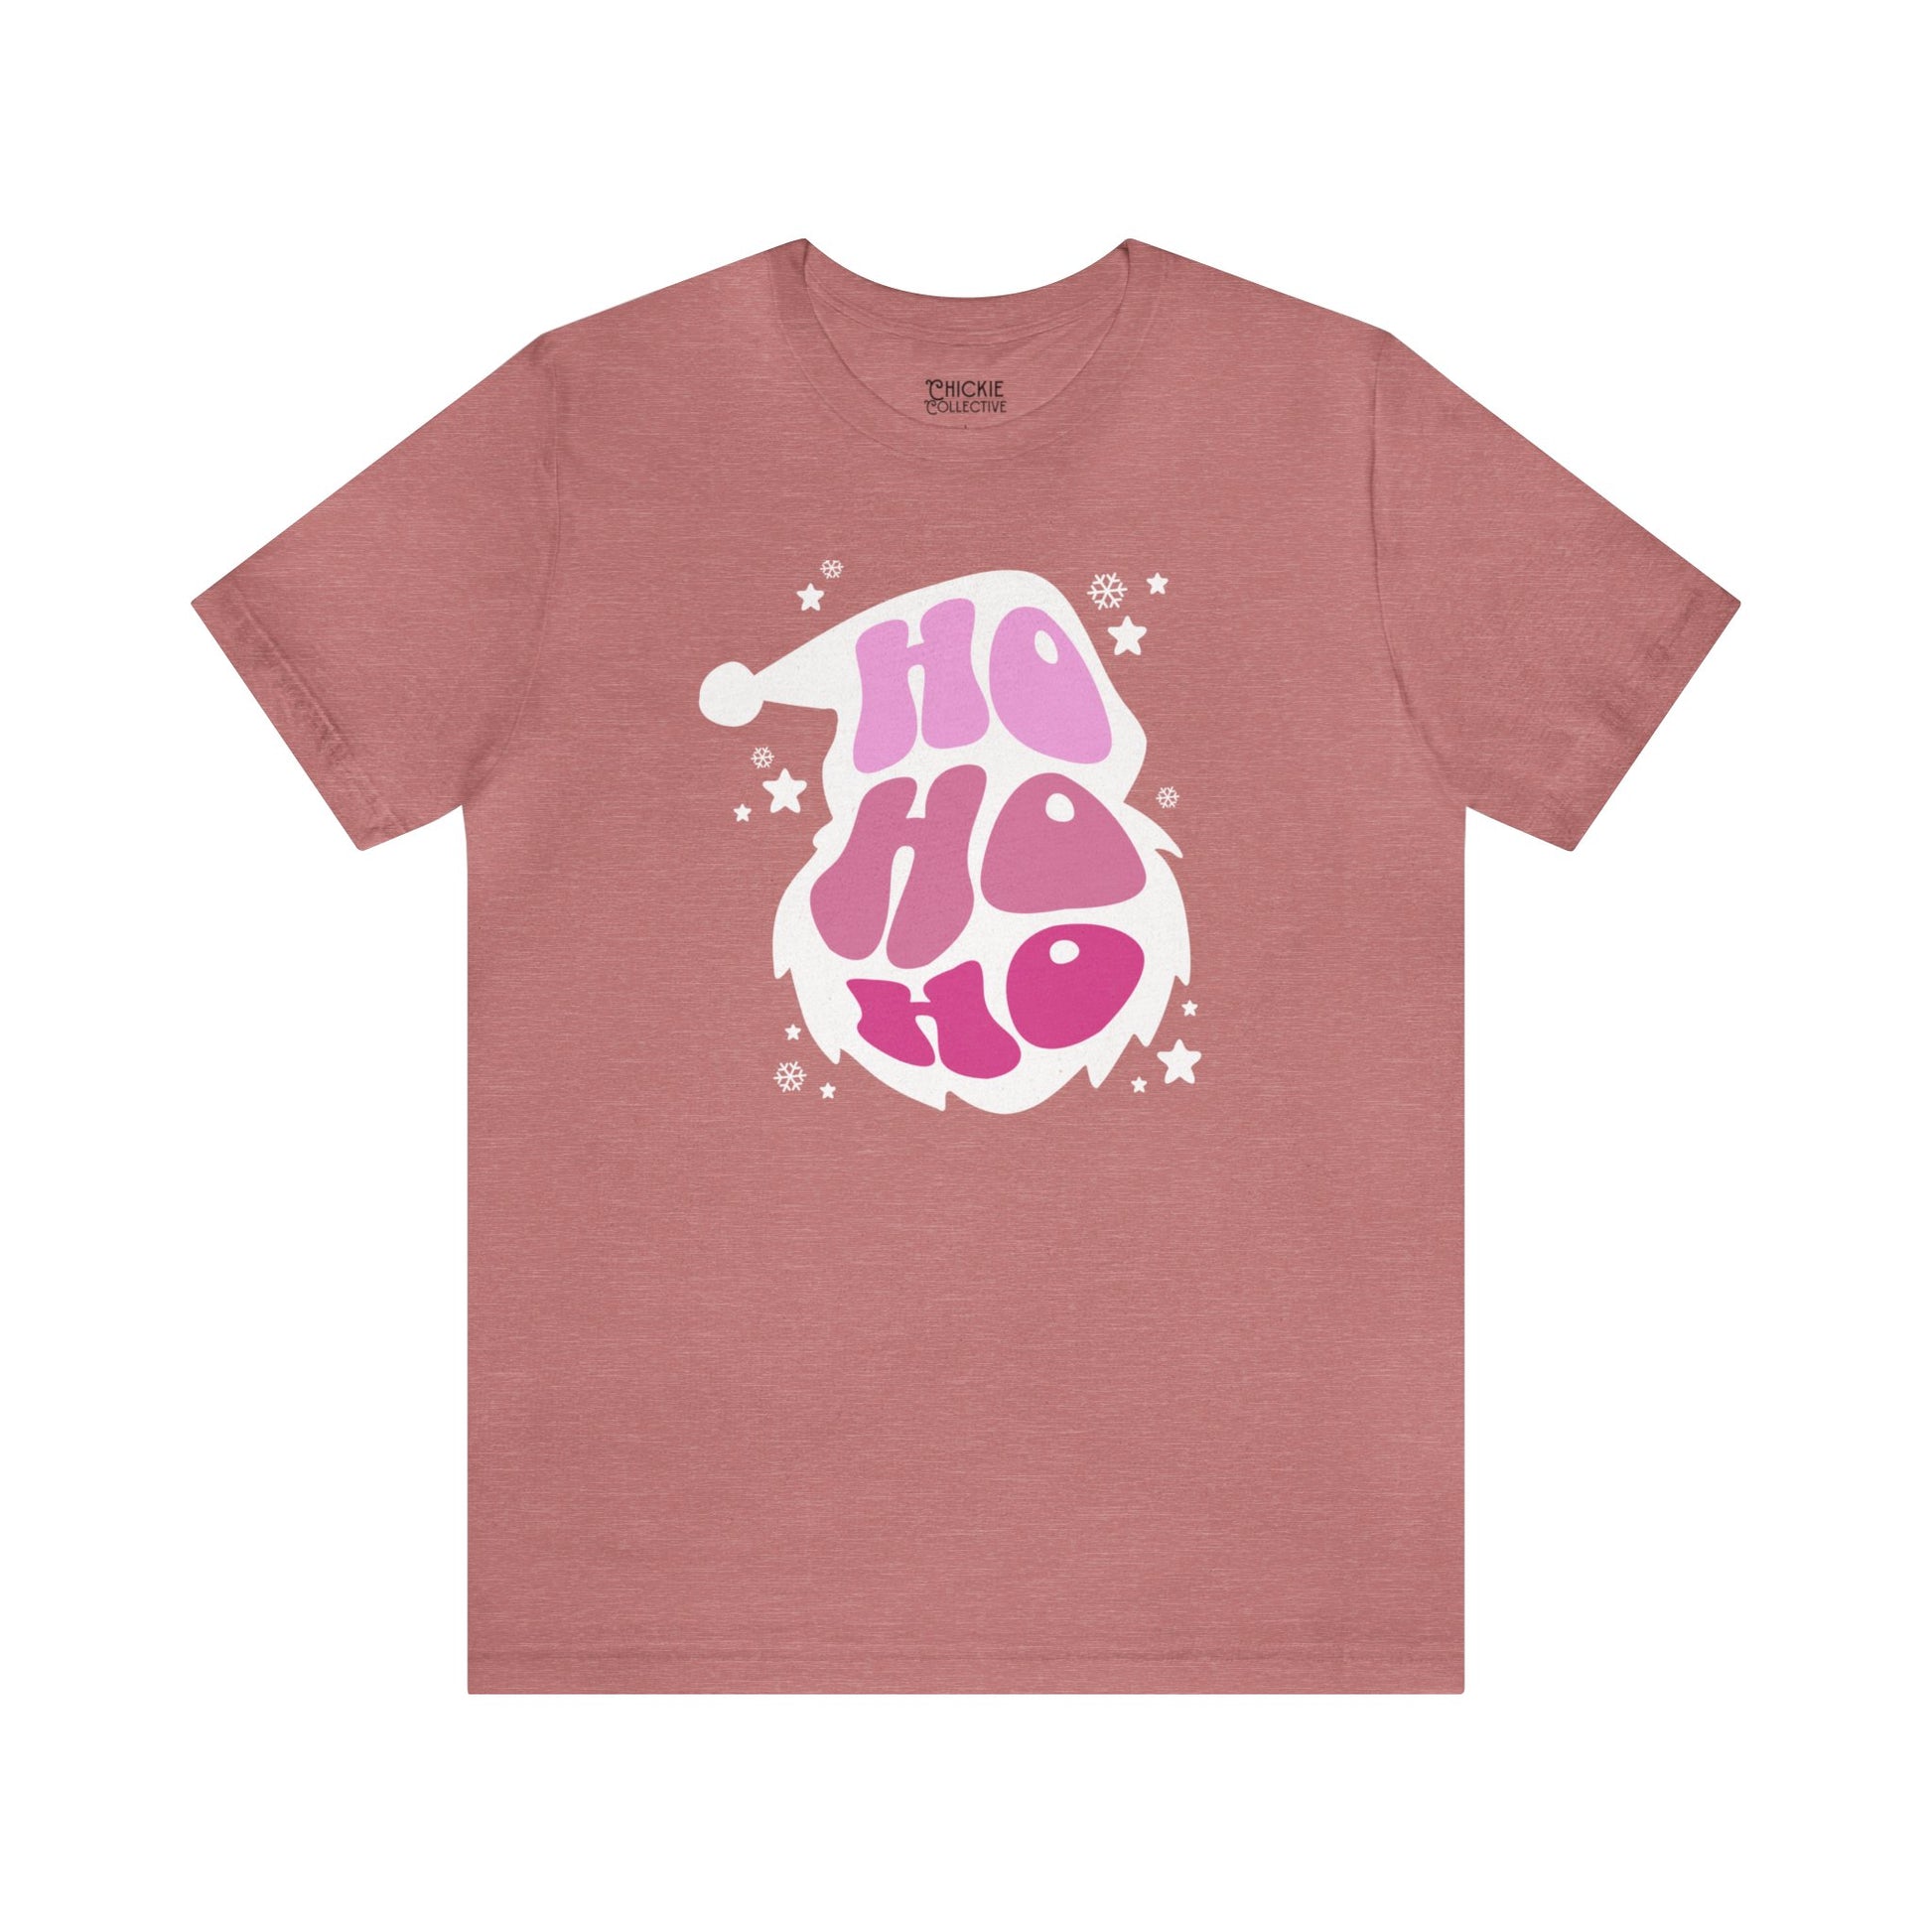 A Printify Unisex Jersey Short Sleeve Tee in pink with an image of Santa Claus.